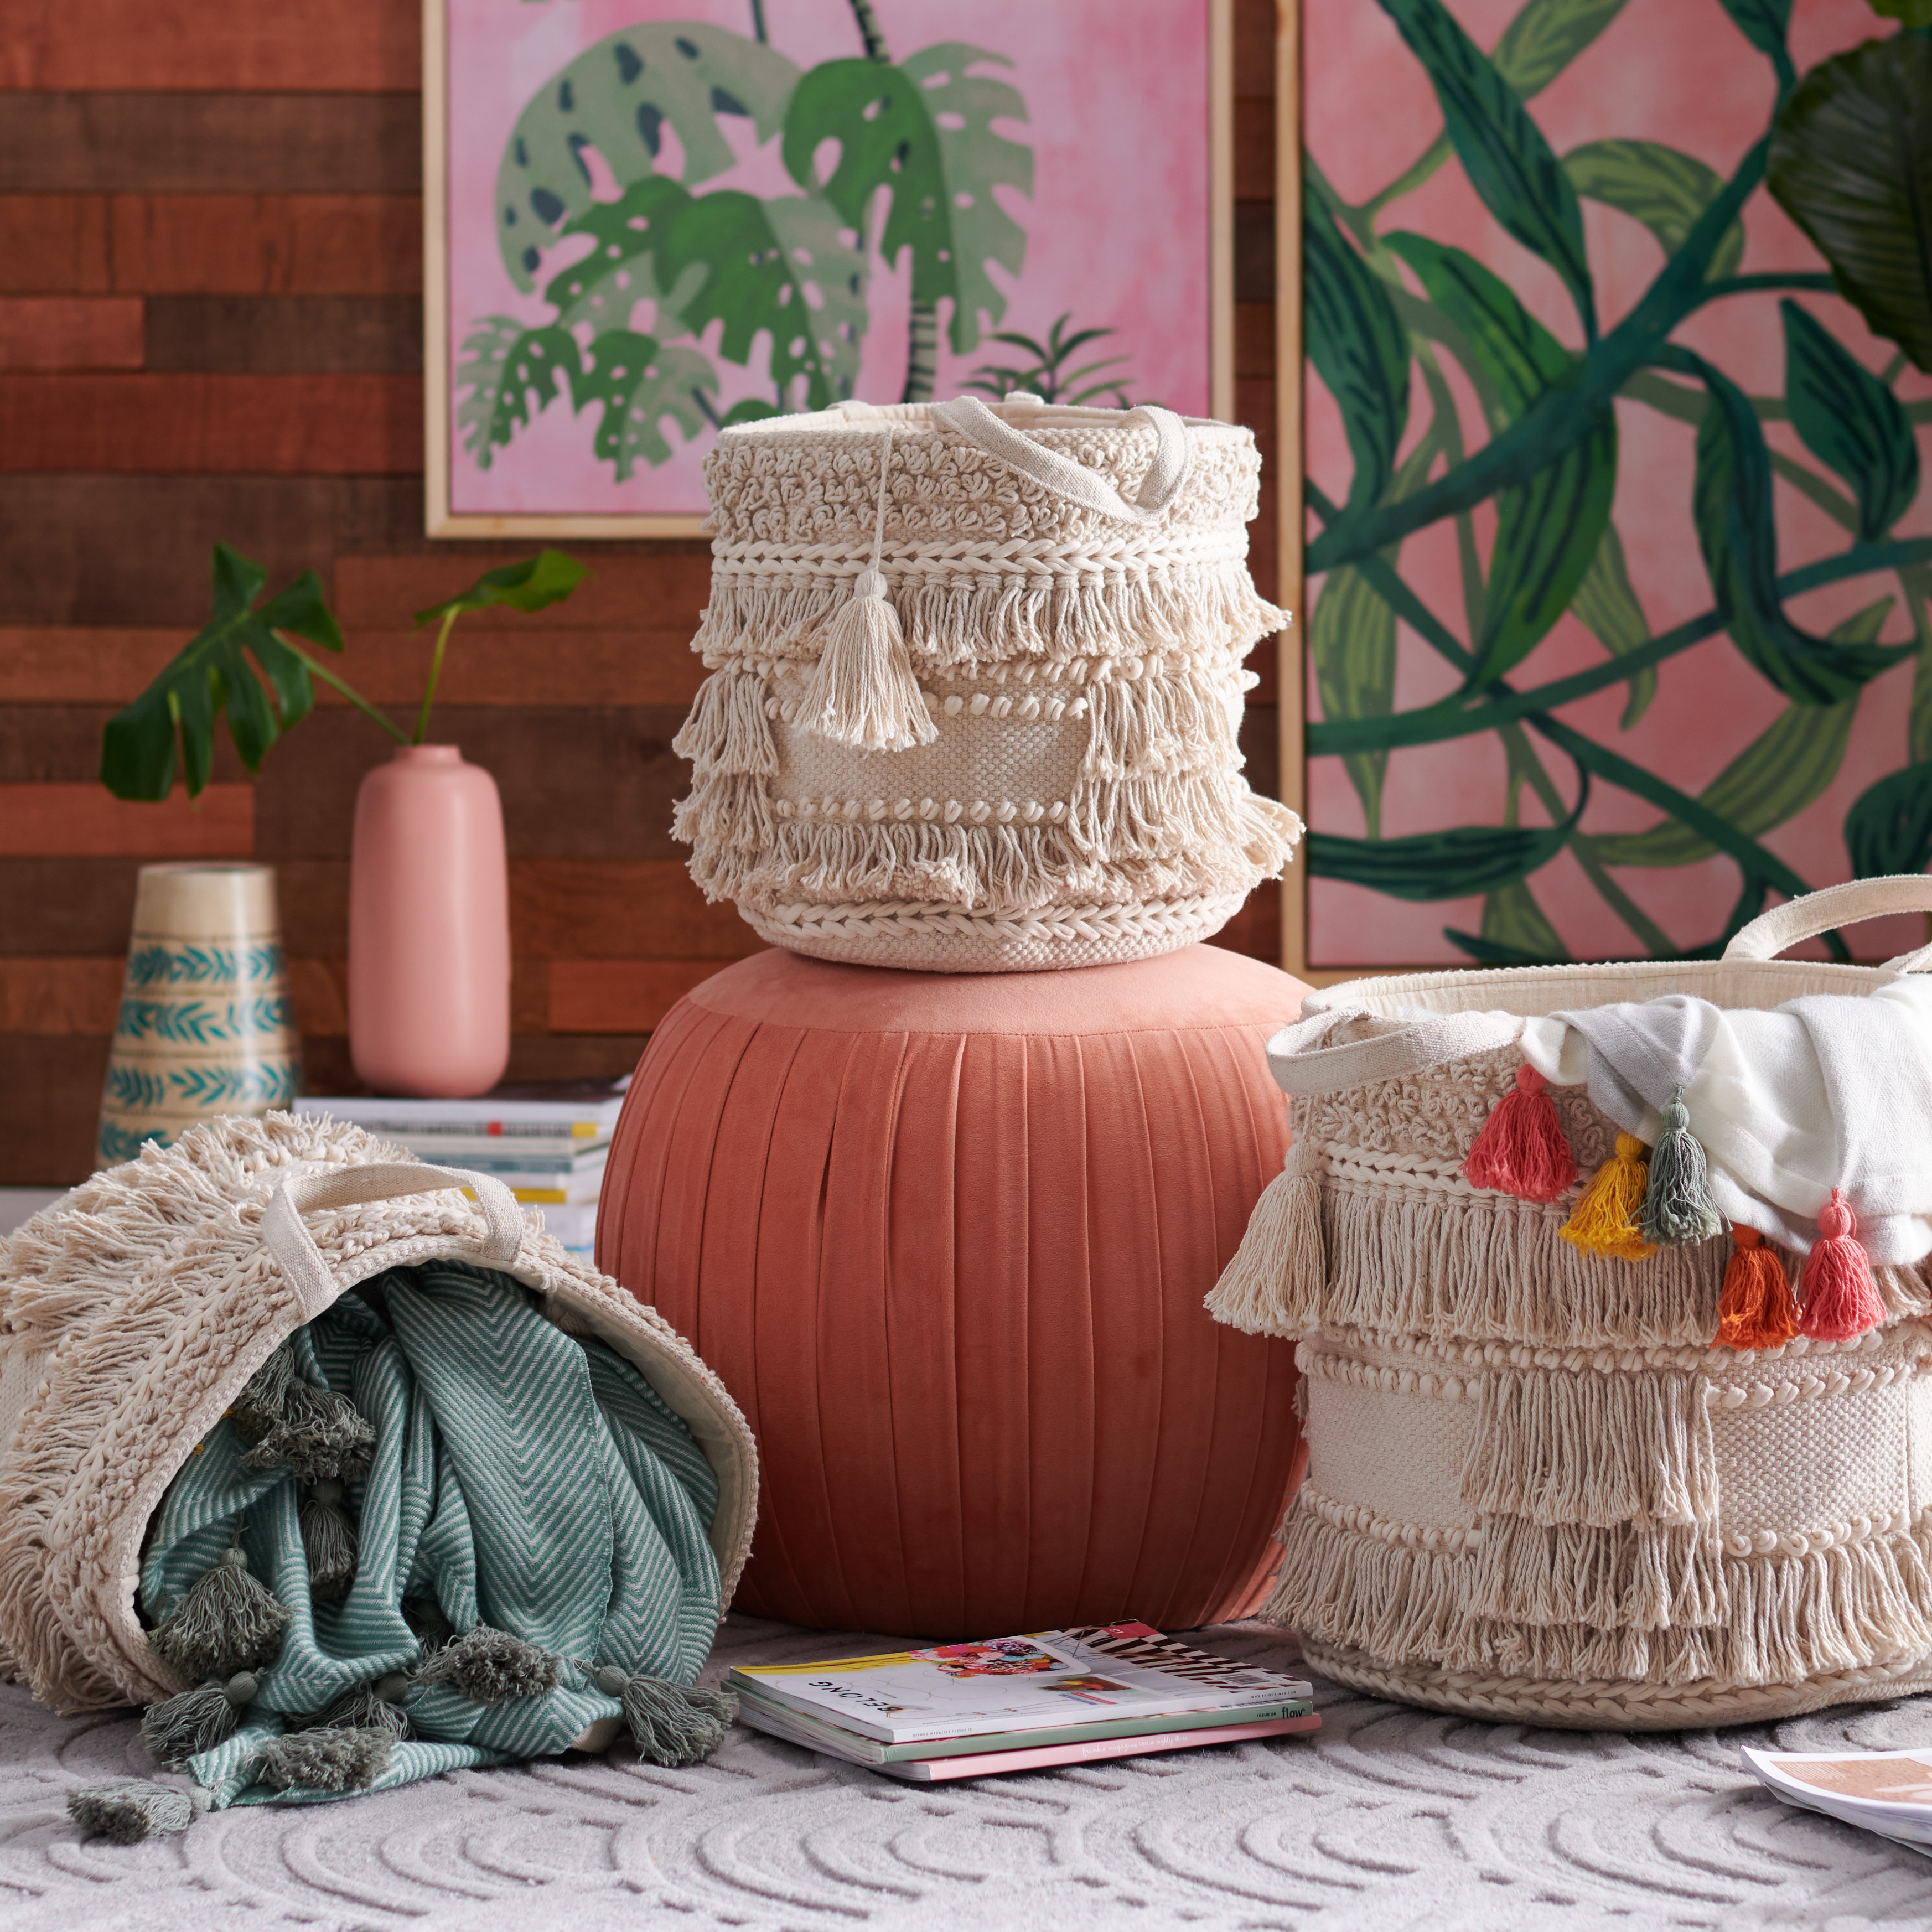 Hand Woven Macrame 3 Piece Basket Set, Natural by Drew Barrymore Flower Home - image 2 of 8